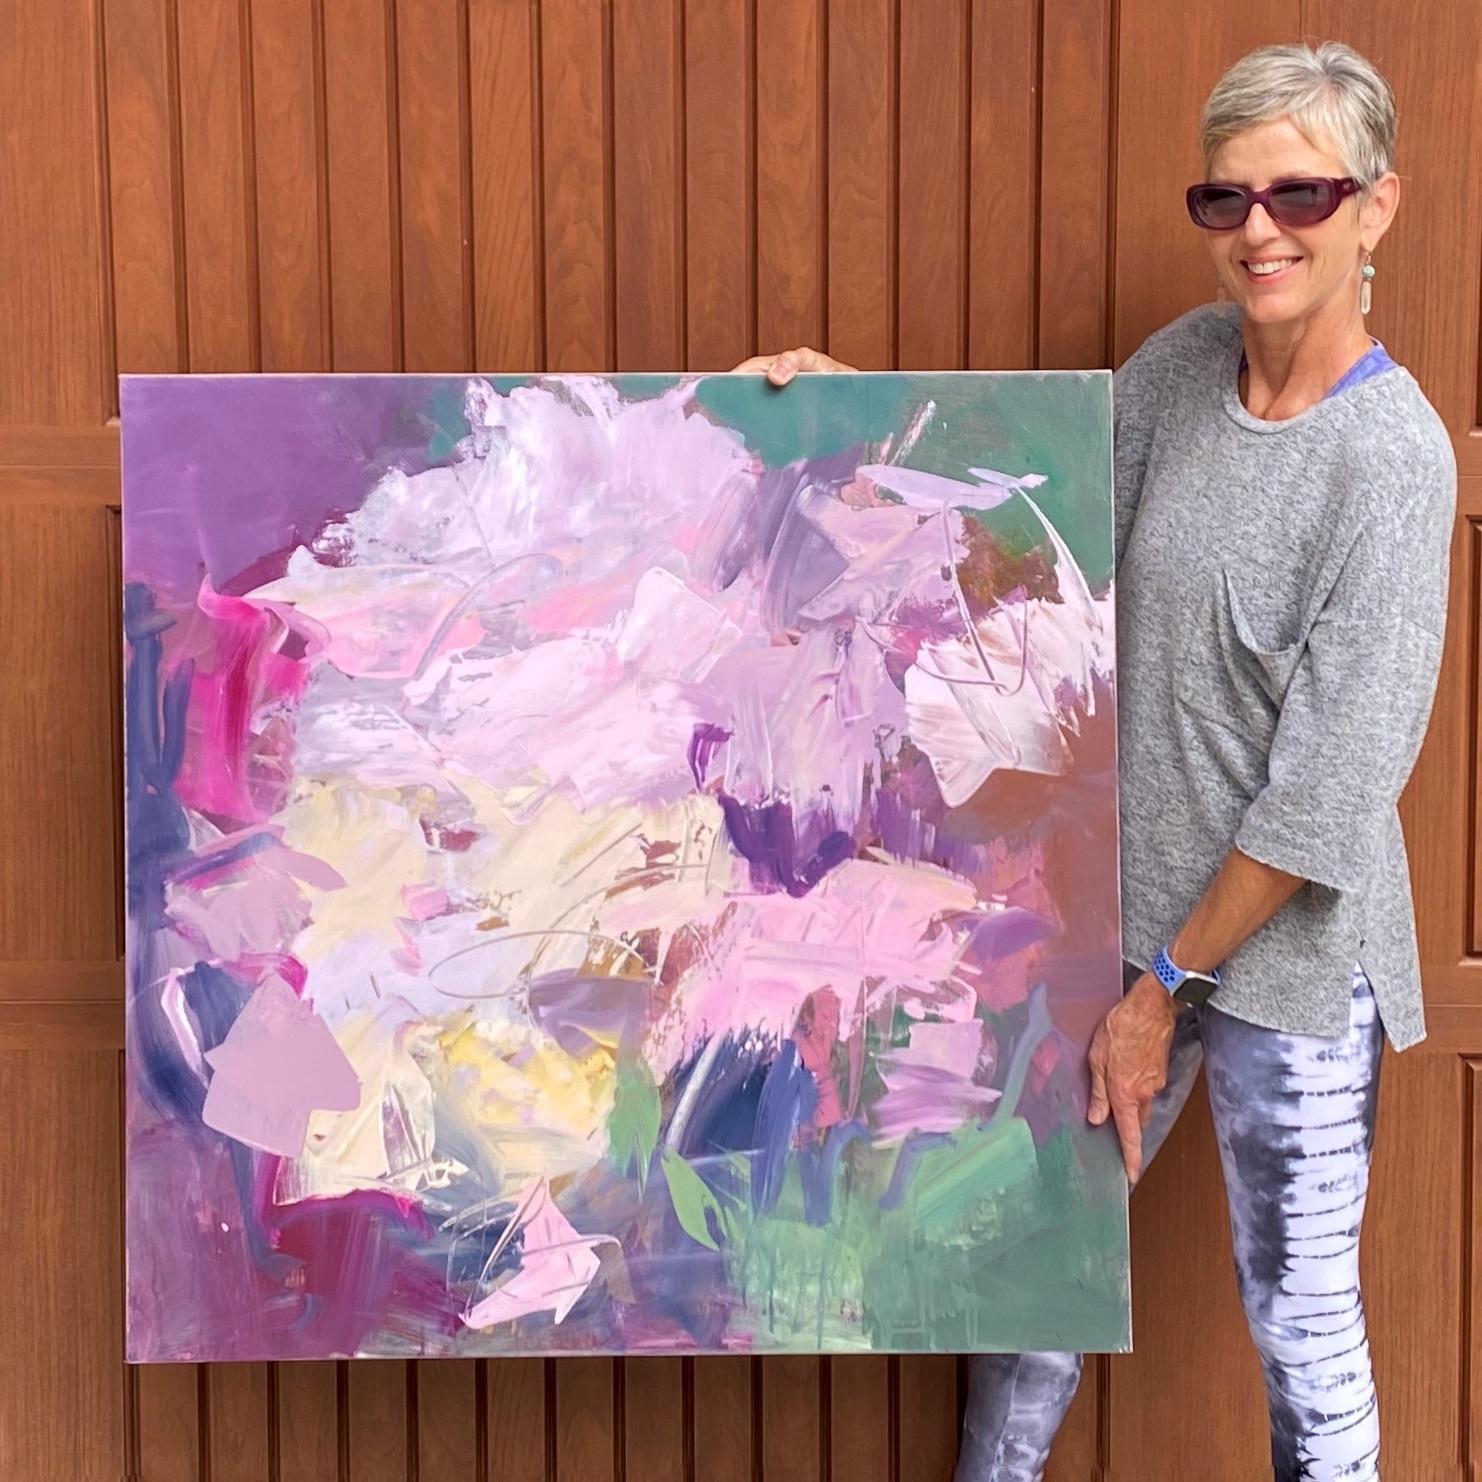 'Bloom Bomb, Deeper Still and Jubilation' all incorporate Michelle Marra's swaths of colour, texture and light. She is inspired by the lyrical movement and biomorphic forms in luscious, impasto paint while creating a joyous, spirited feeling. This